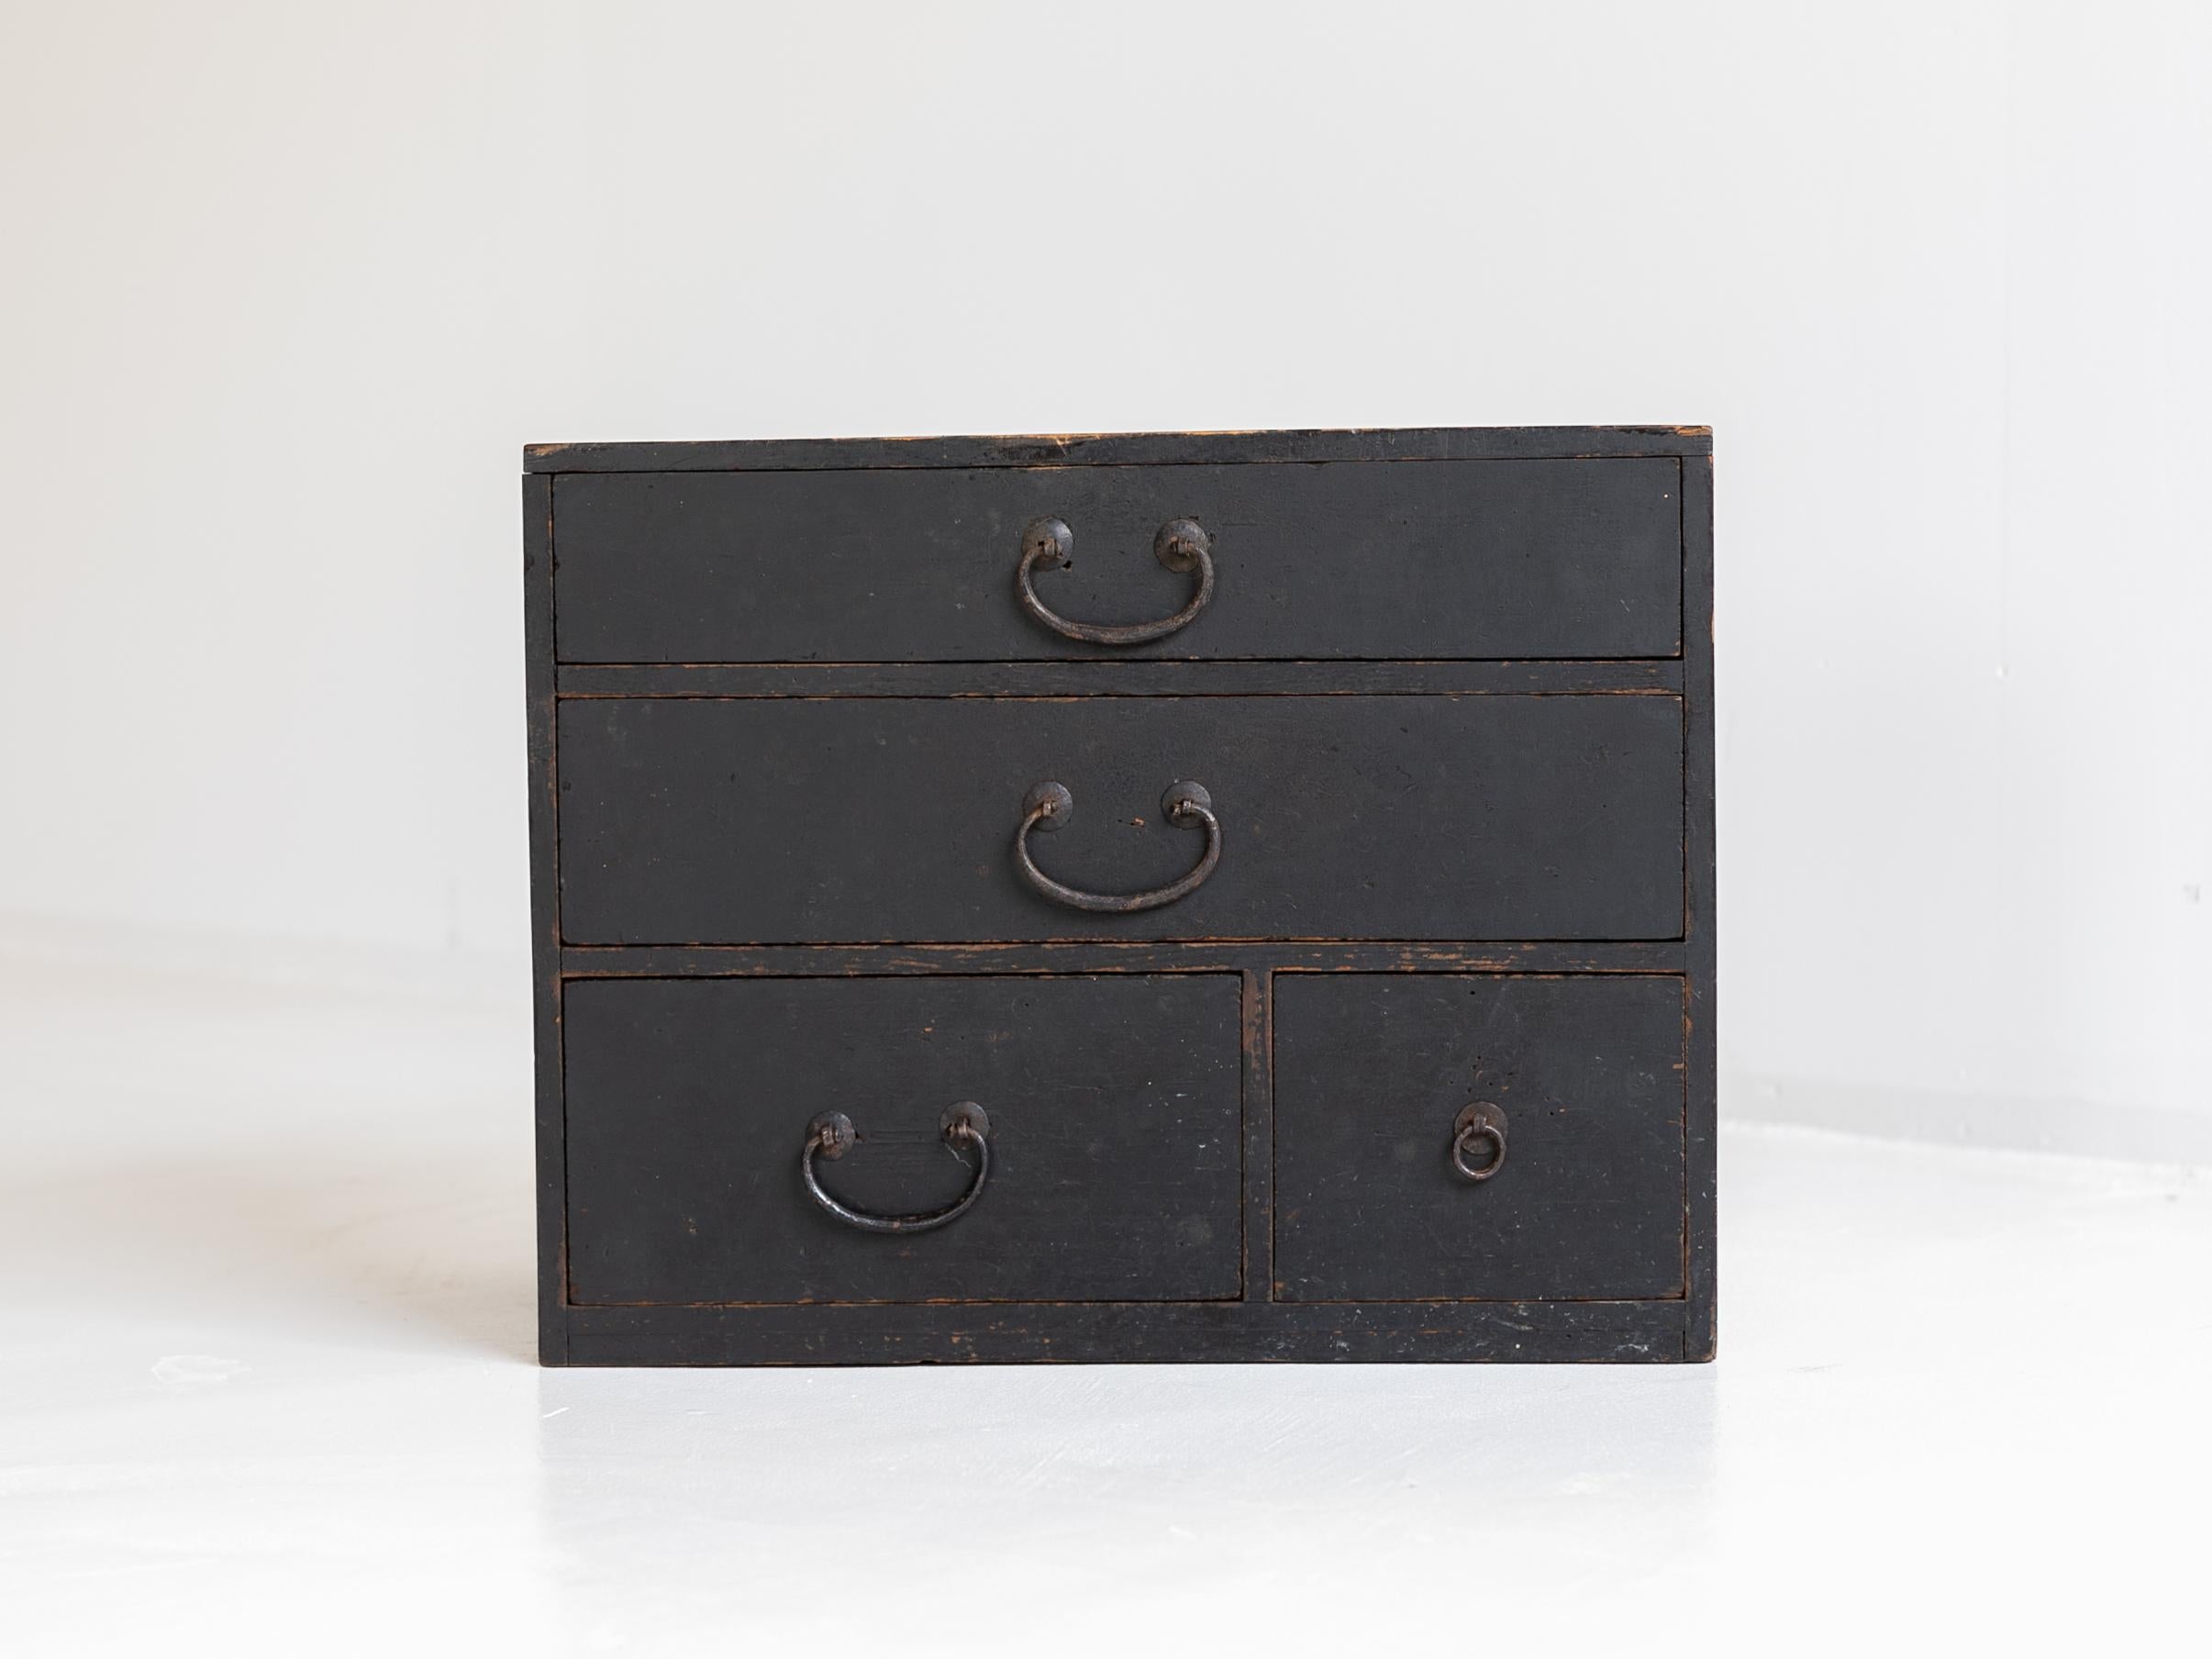 It is a very old Japanese drawer.
It was built from the late Edo period to the Meiji period (1820-1912).
It is furniture that was used in shops rather than being used in ordinary homes.
It is painted black.
Made of cedar wood.
The handle is made of